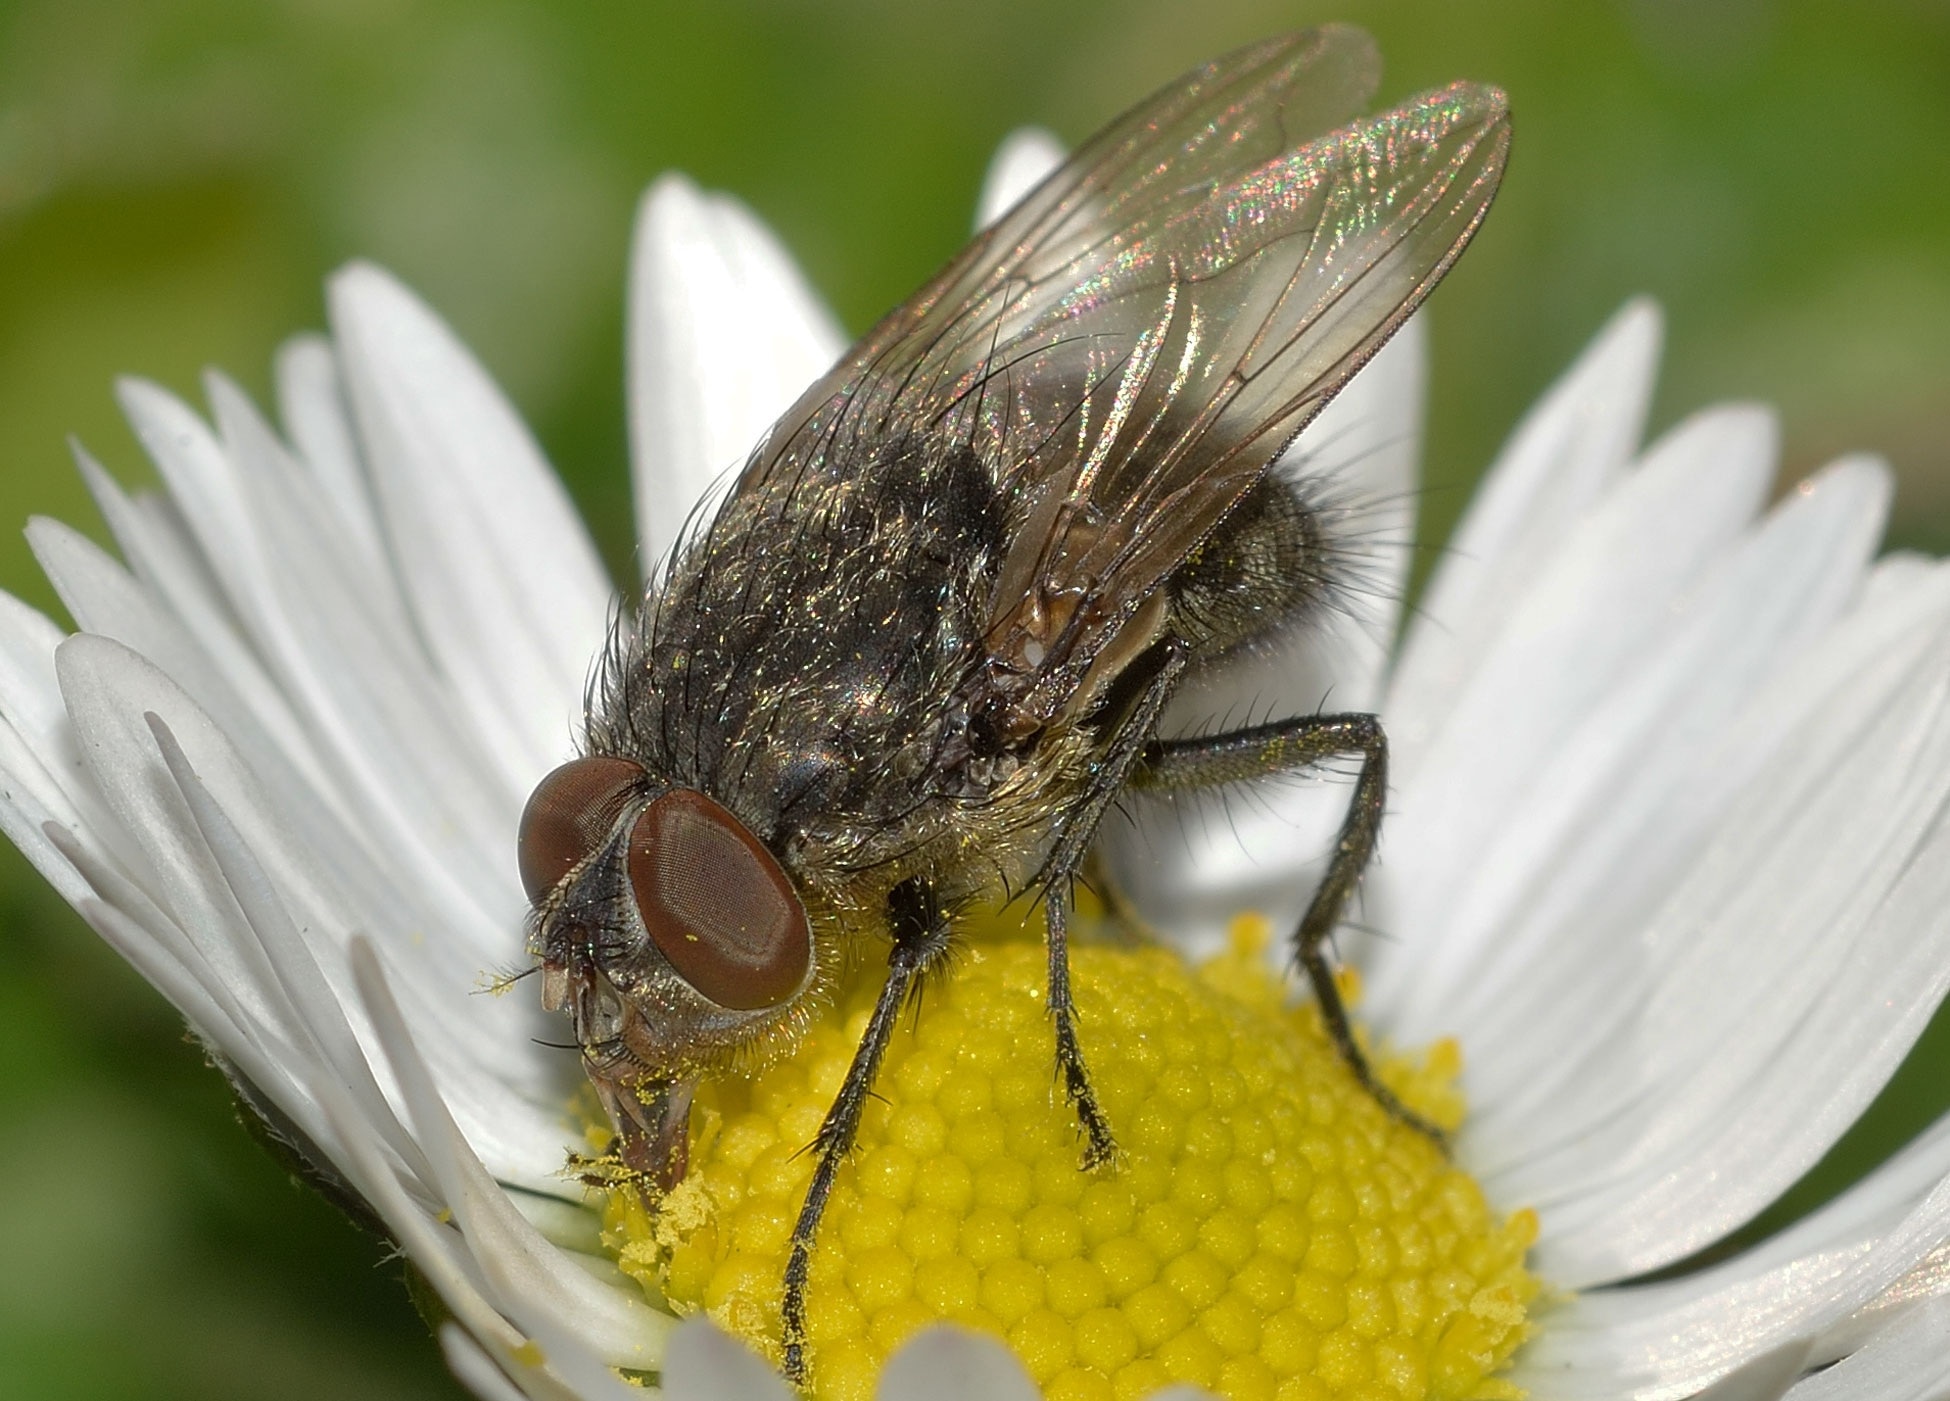 common house fly perched on white Daisy